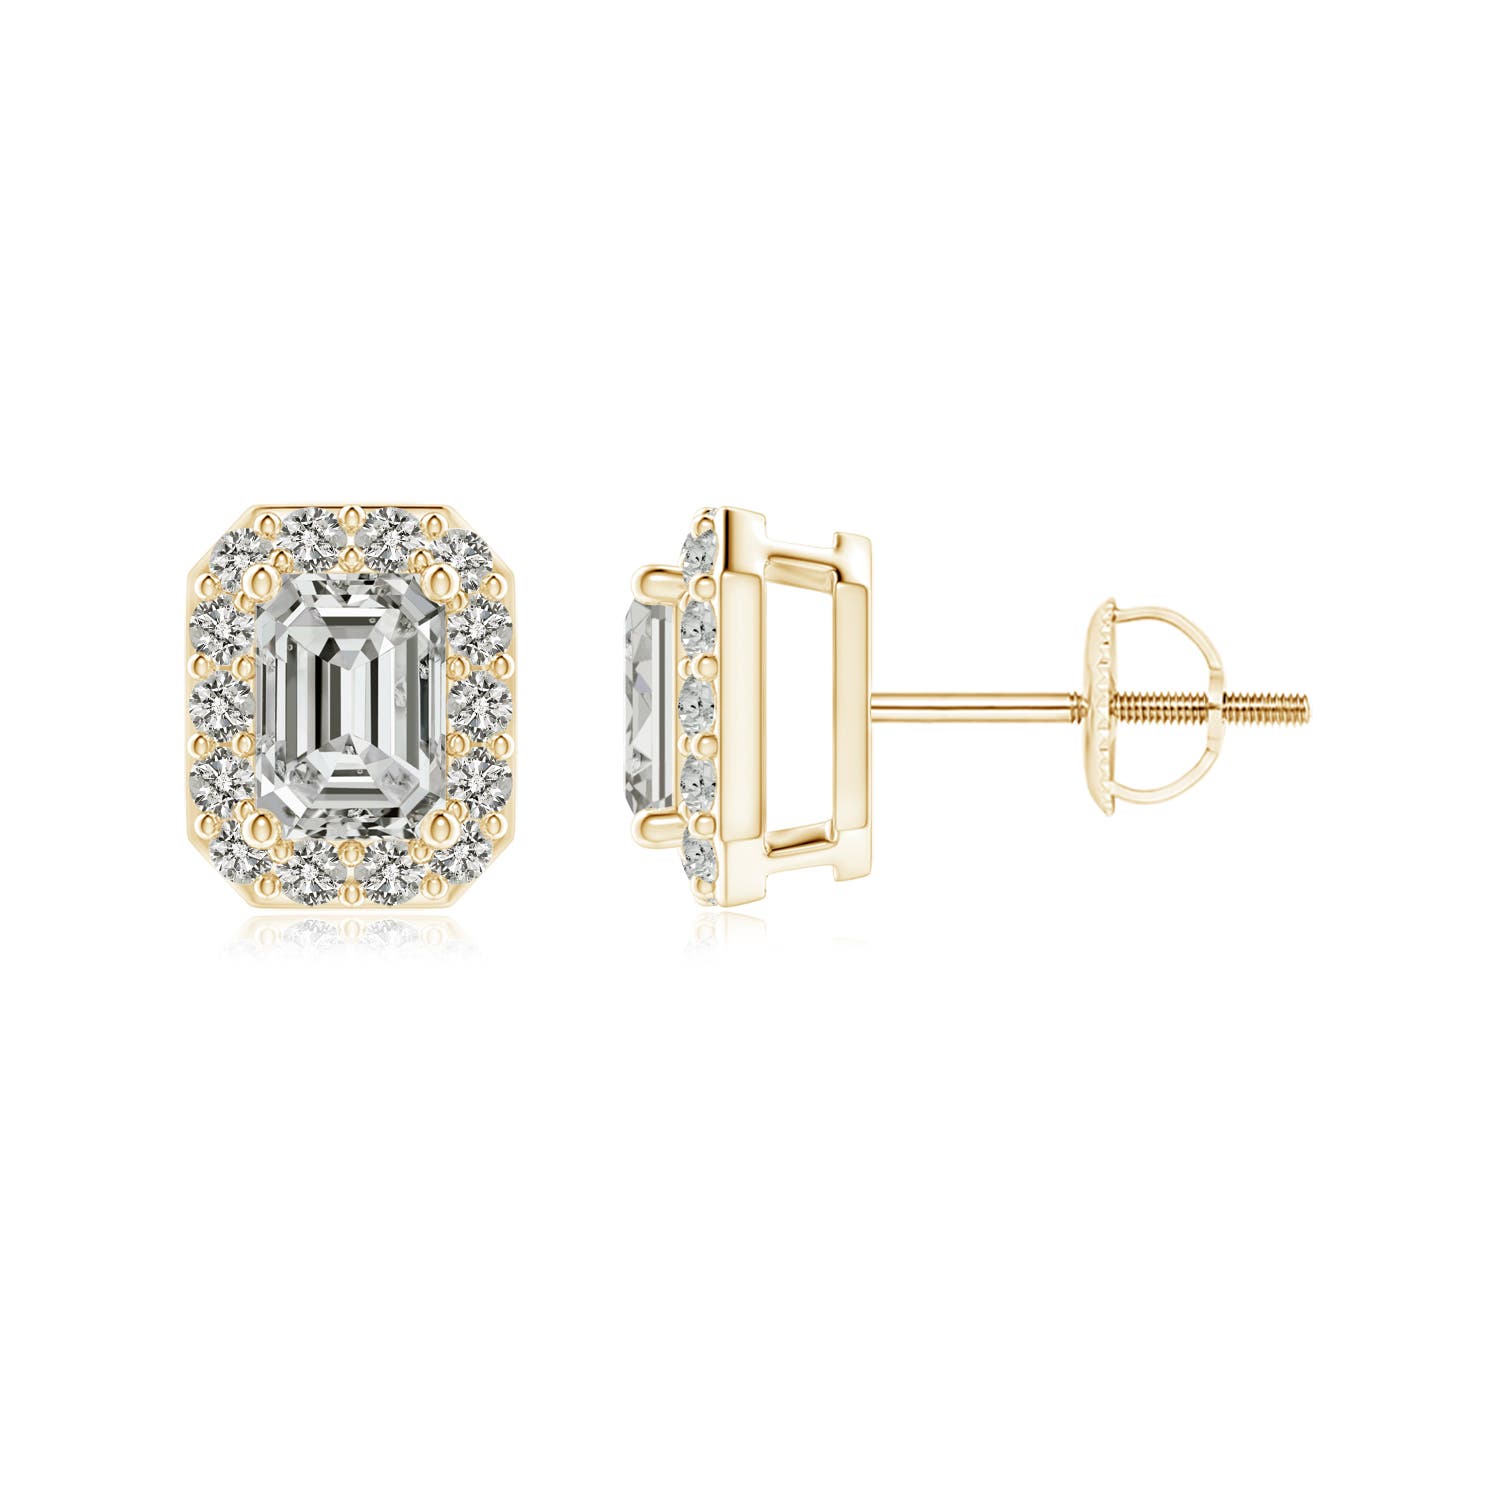 K, I3 / 0.57 CT / 14 KT Yellow Gold